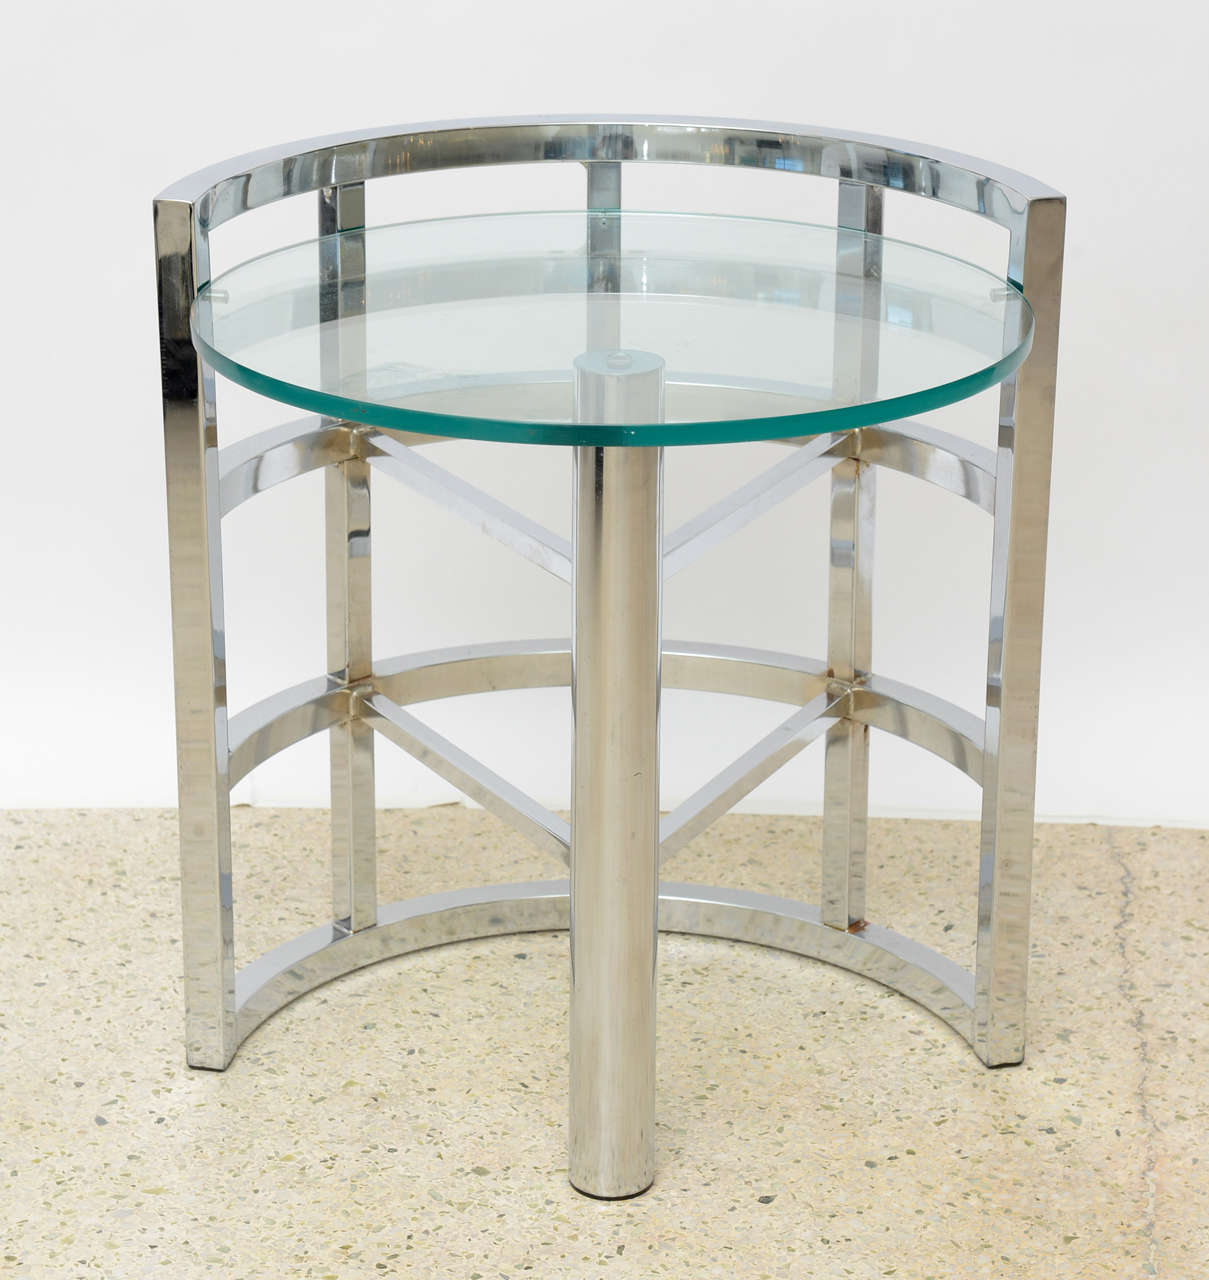 The chrome frame with a cylinder and arms that connect to a 